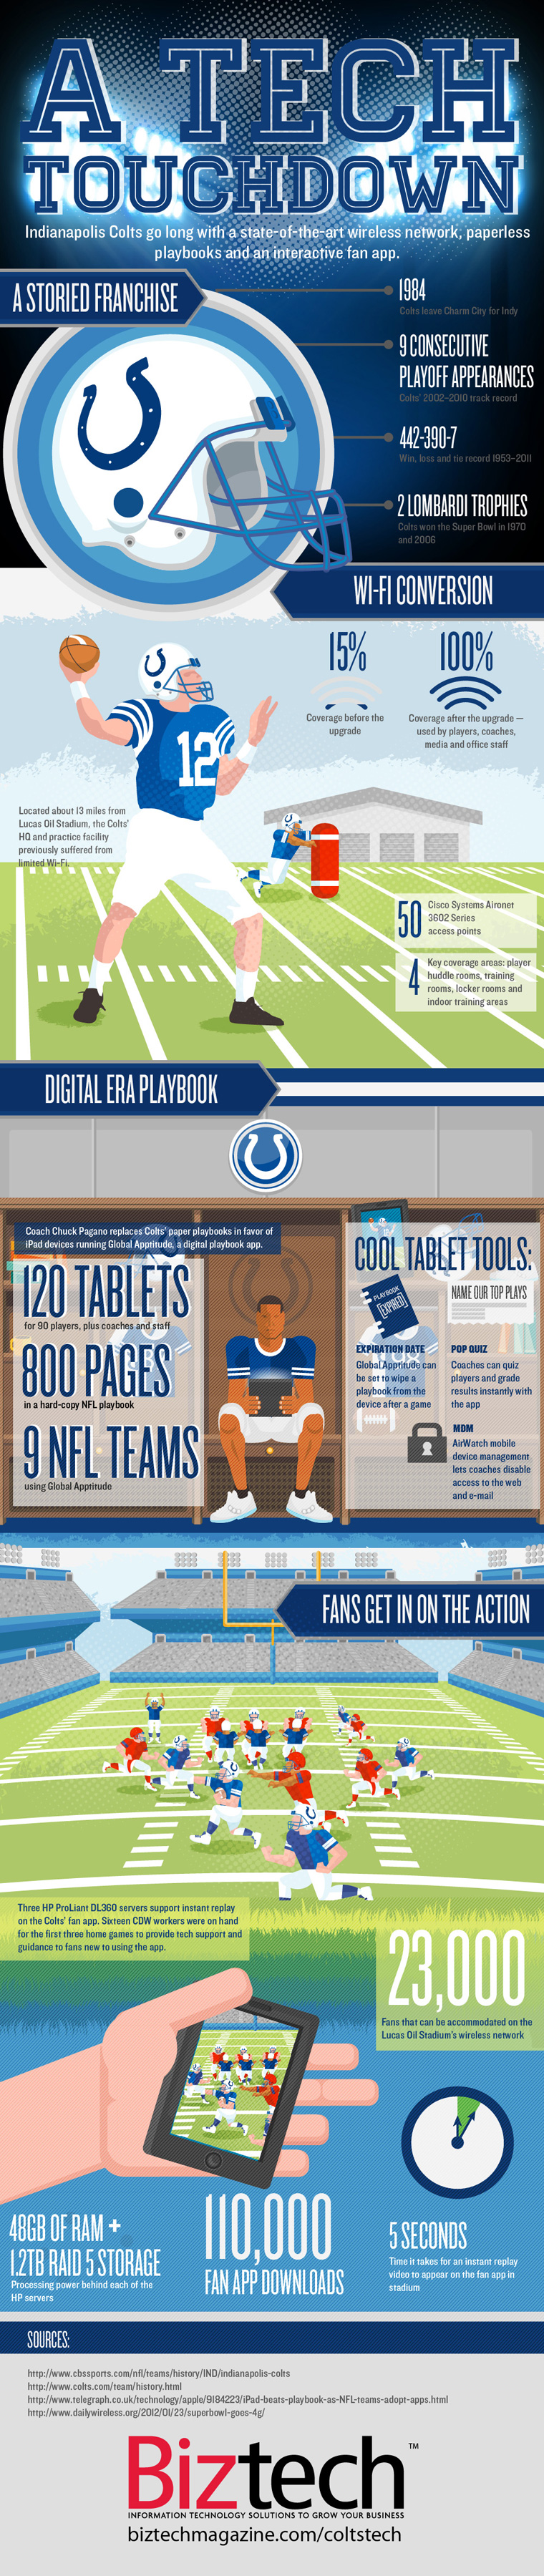 colts_web_infographic_final_760.jpg